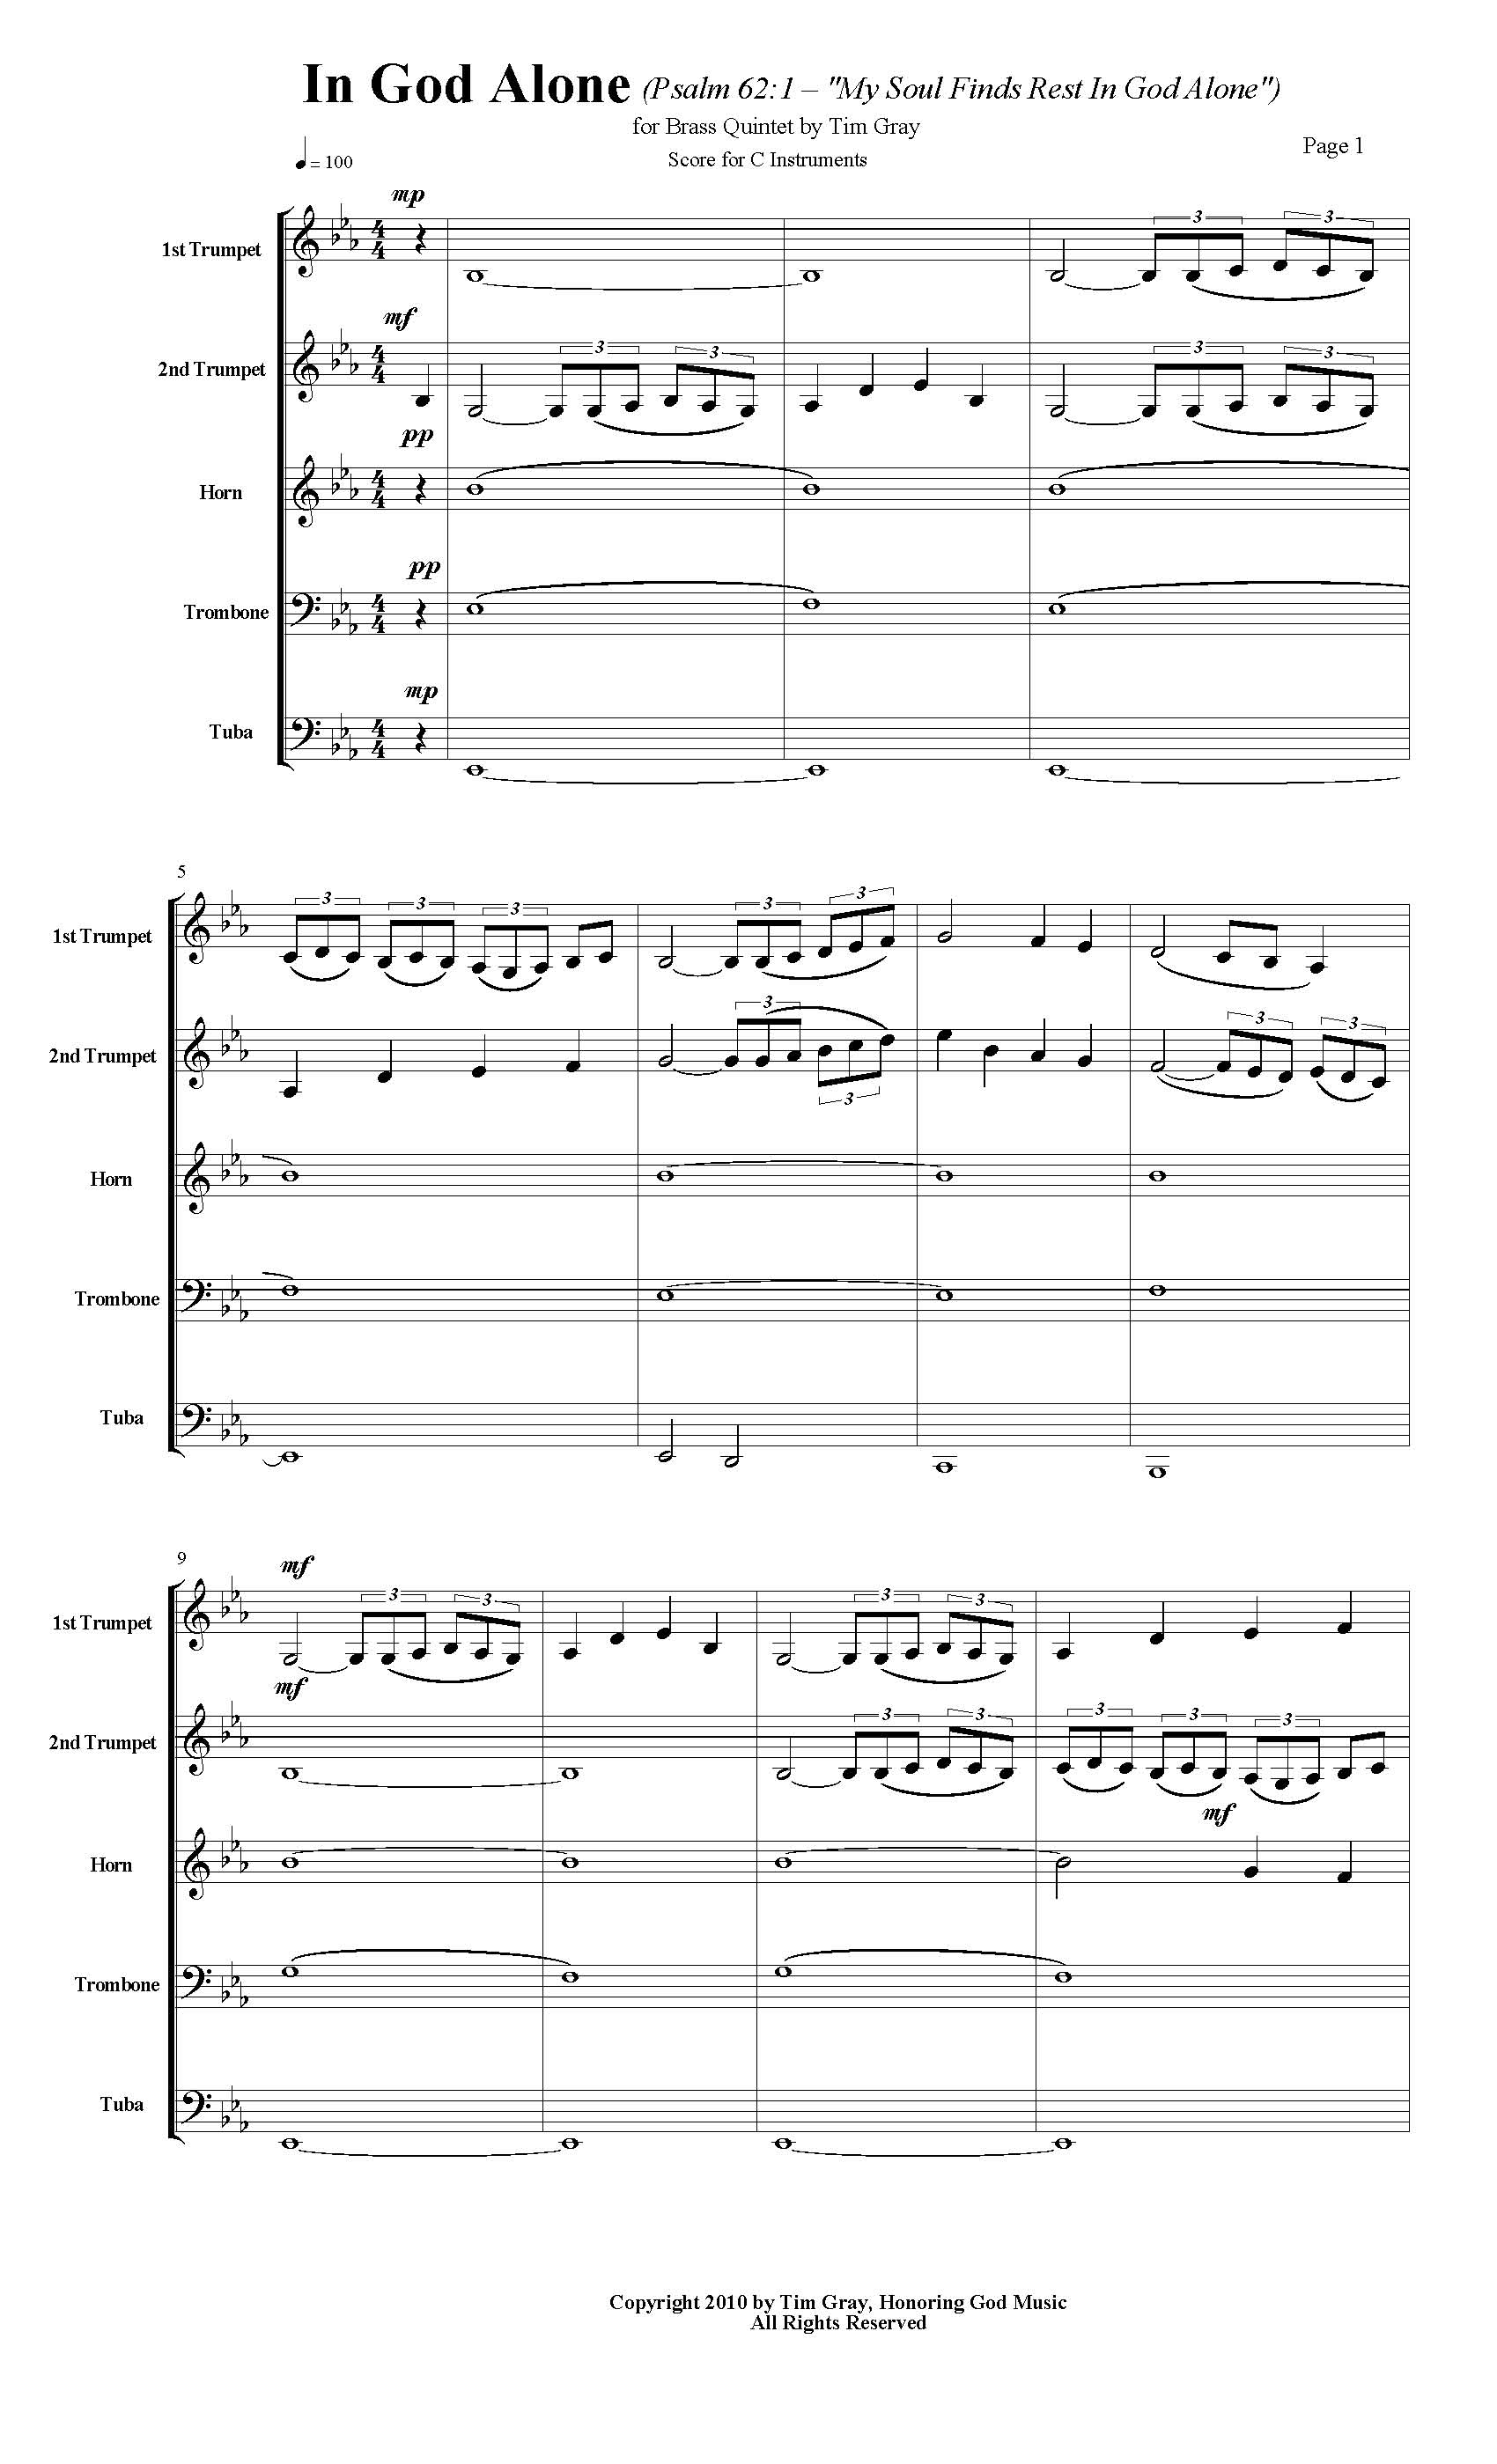 In God Alone - Psalm 62 Brass Quintet by Tim Gray sample page 1 at HonoringGodMusic.com